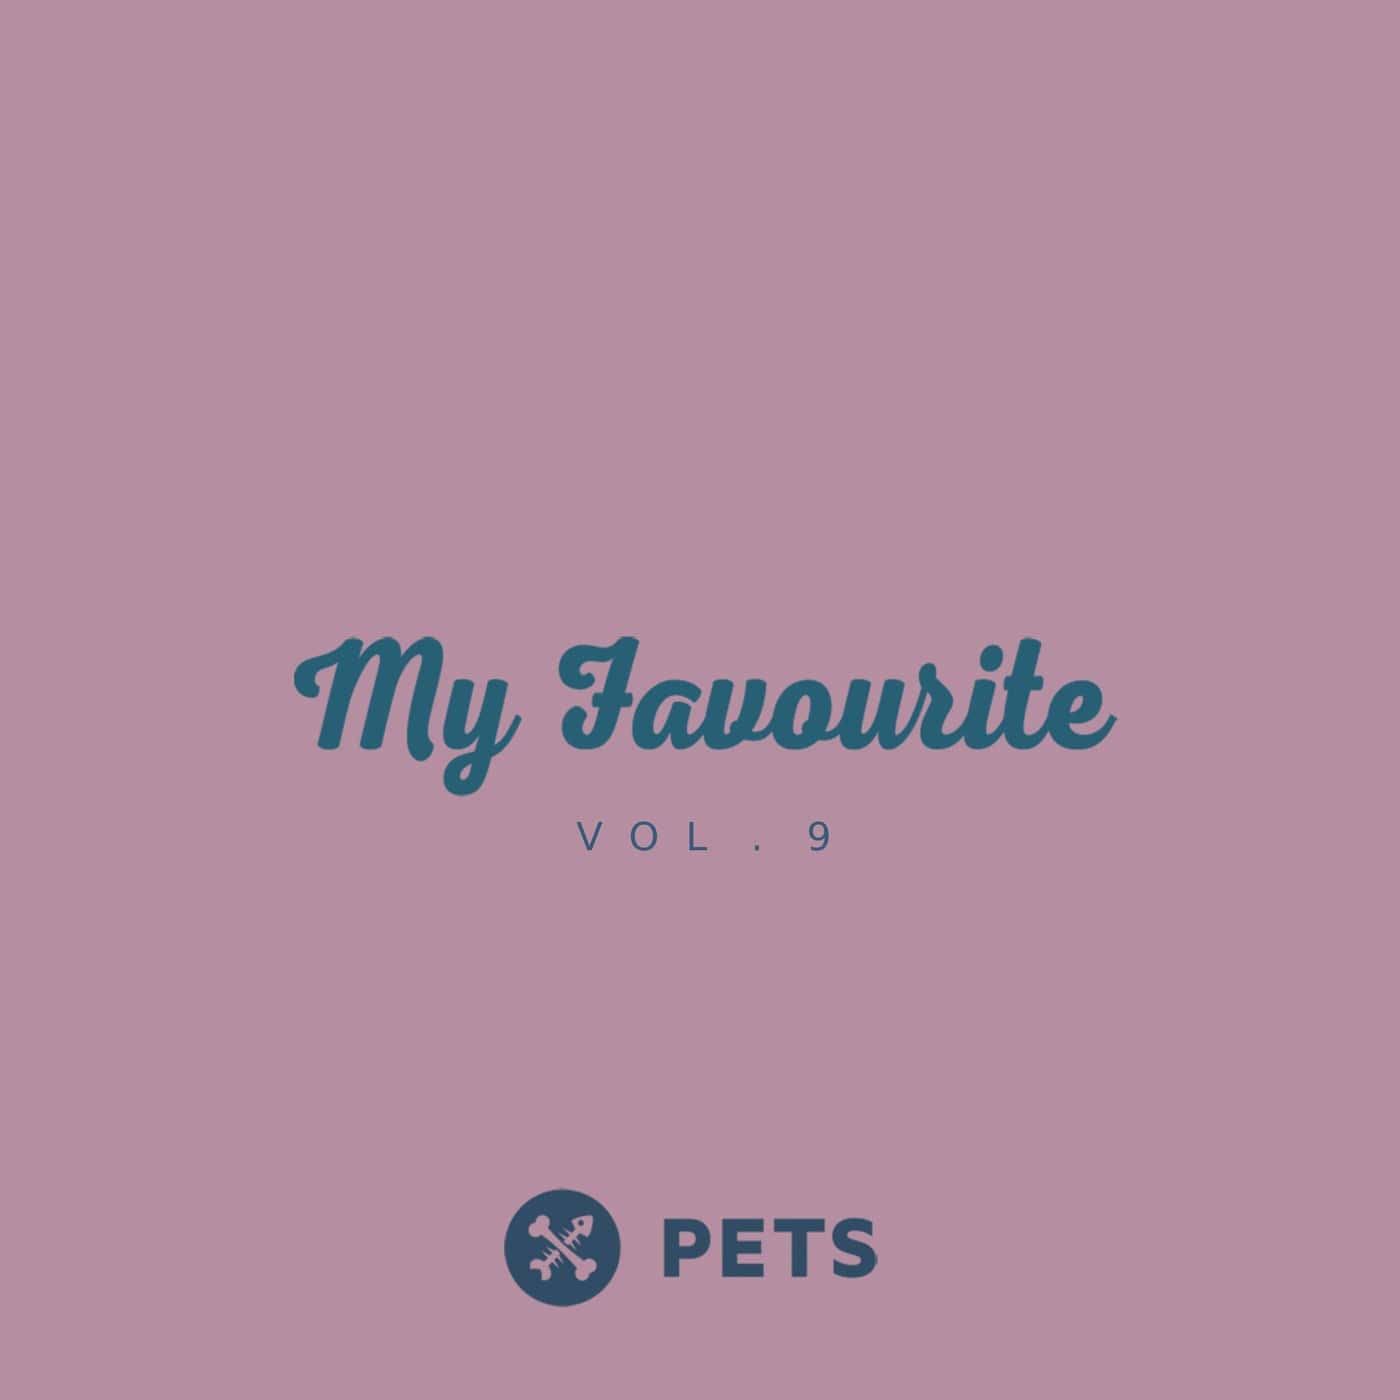 Download My Favourite PETS, Vol. 9 on Electrobuzz